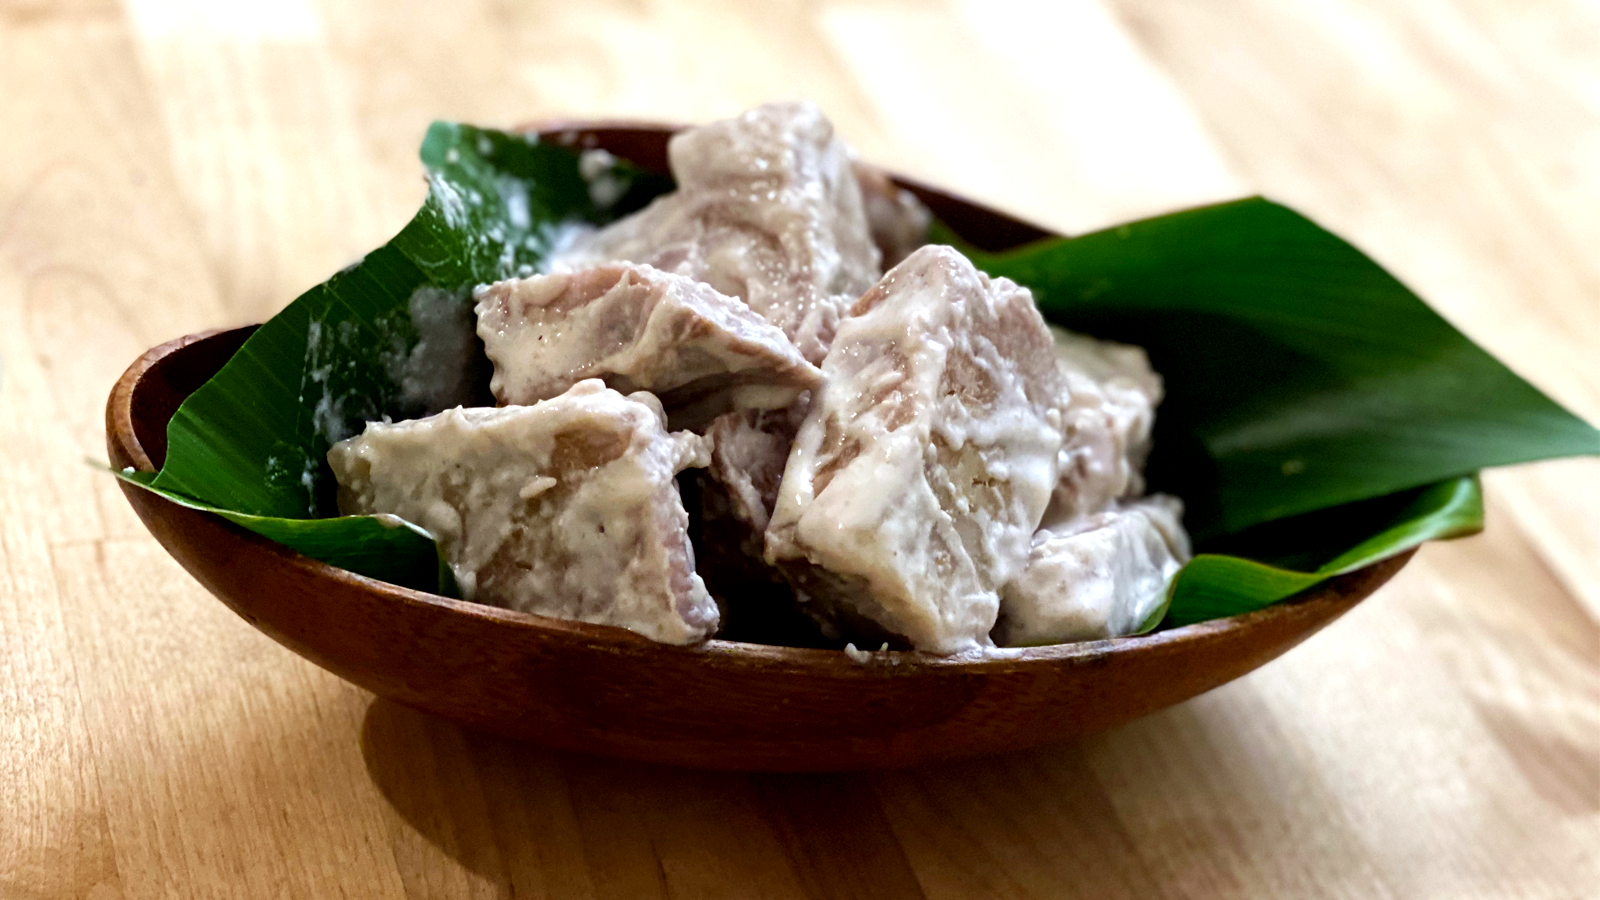 Image of Kalo with Coconut Cream